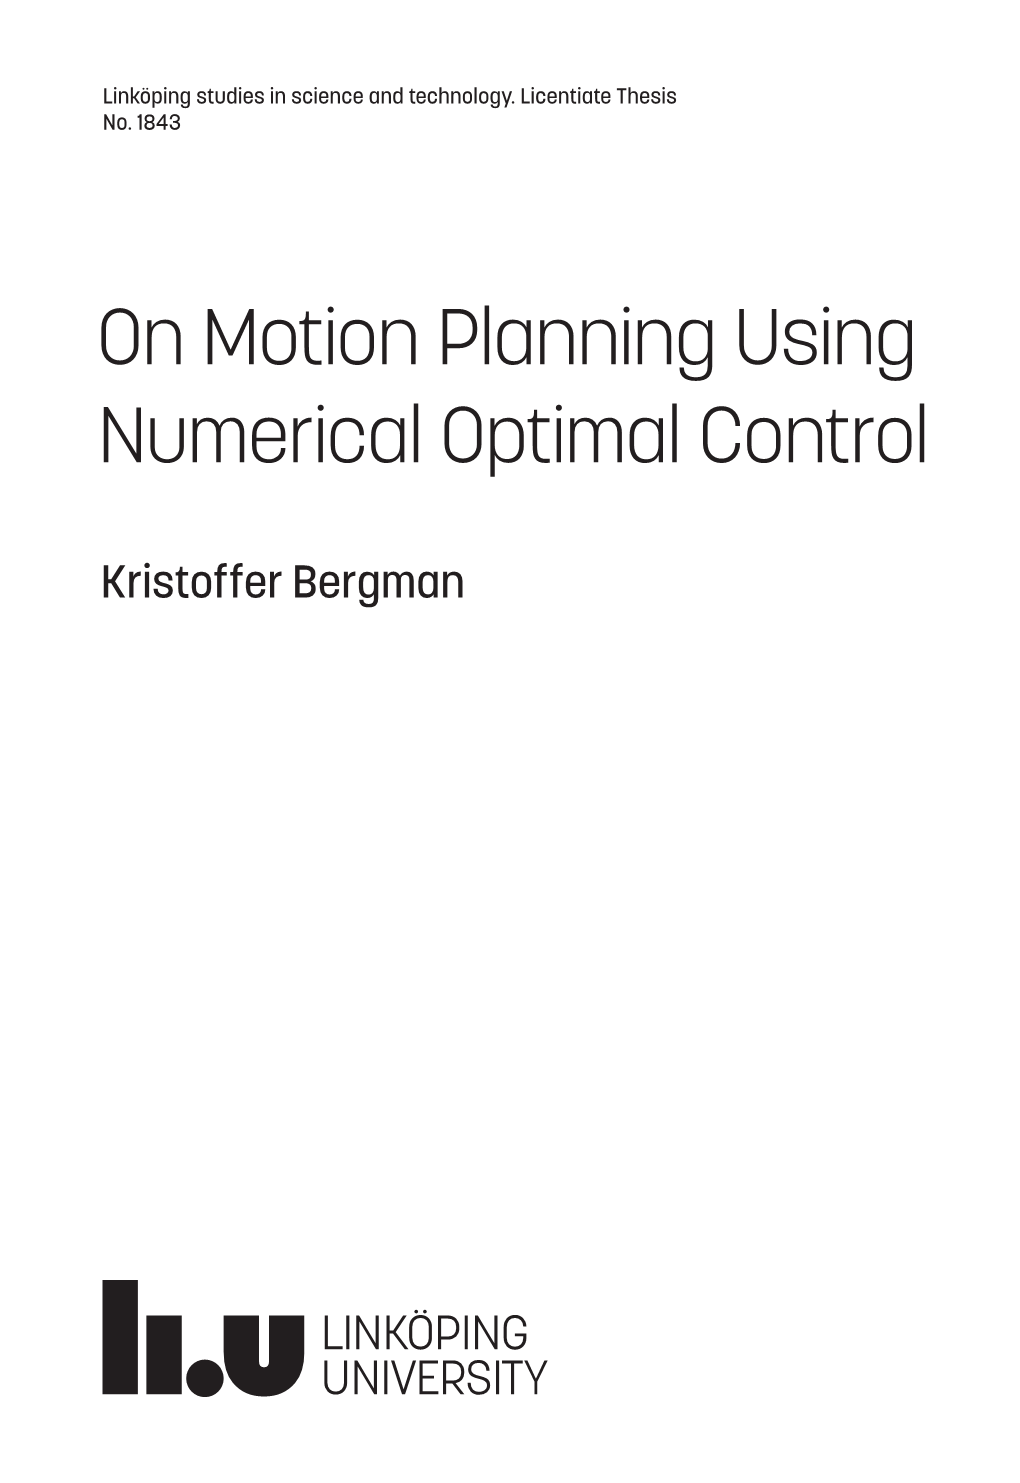 On Motion Planning Using Numerical Optimal Control